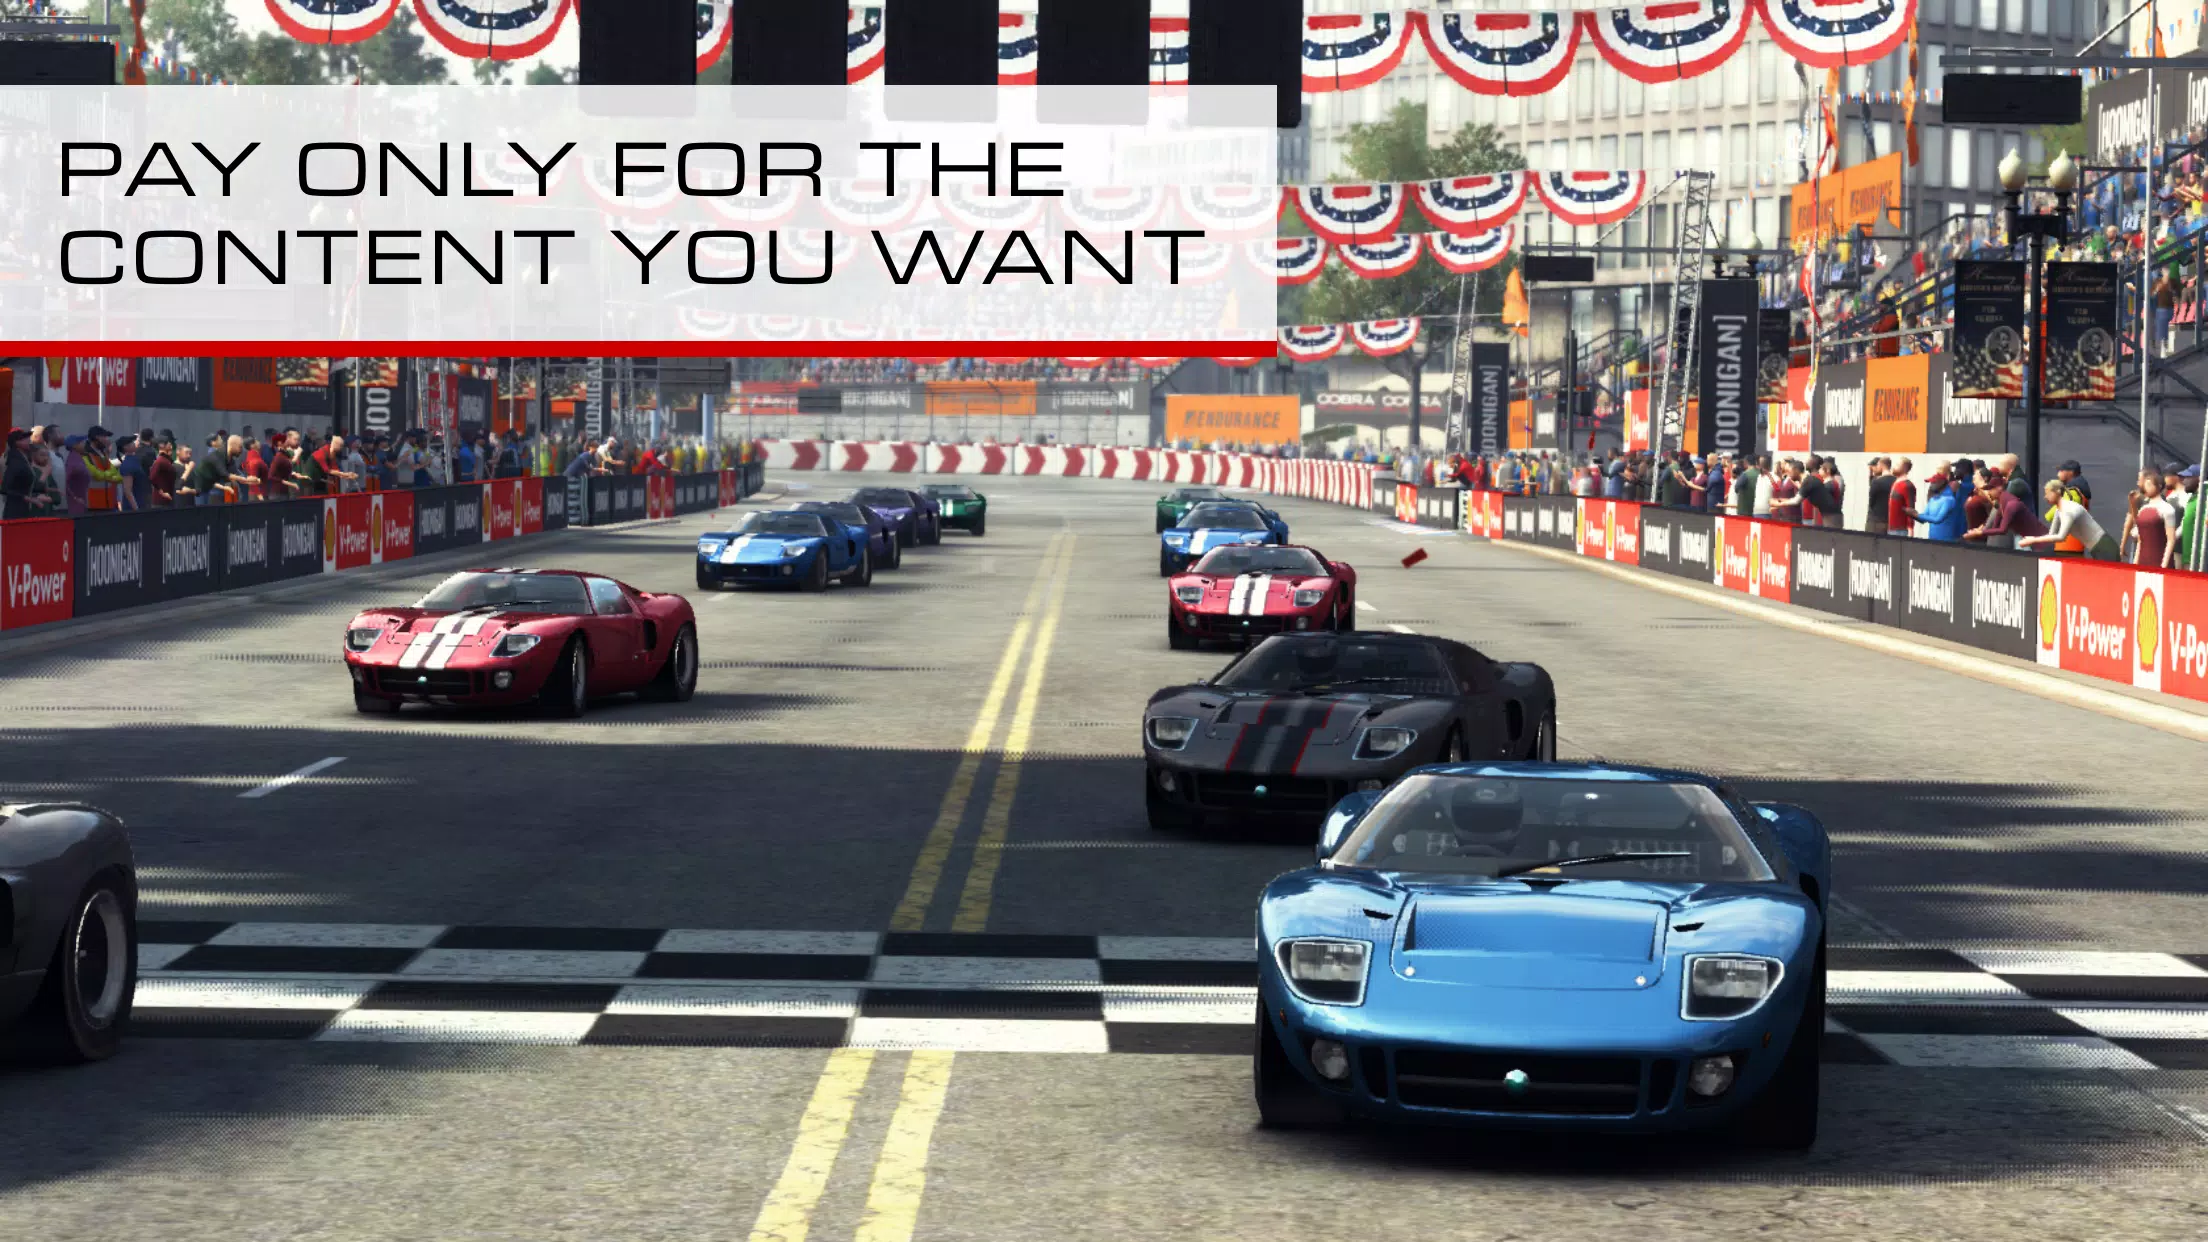 GRID™ Autosport Android  How To Unlock Performance Plus Mode